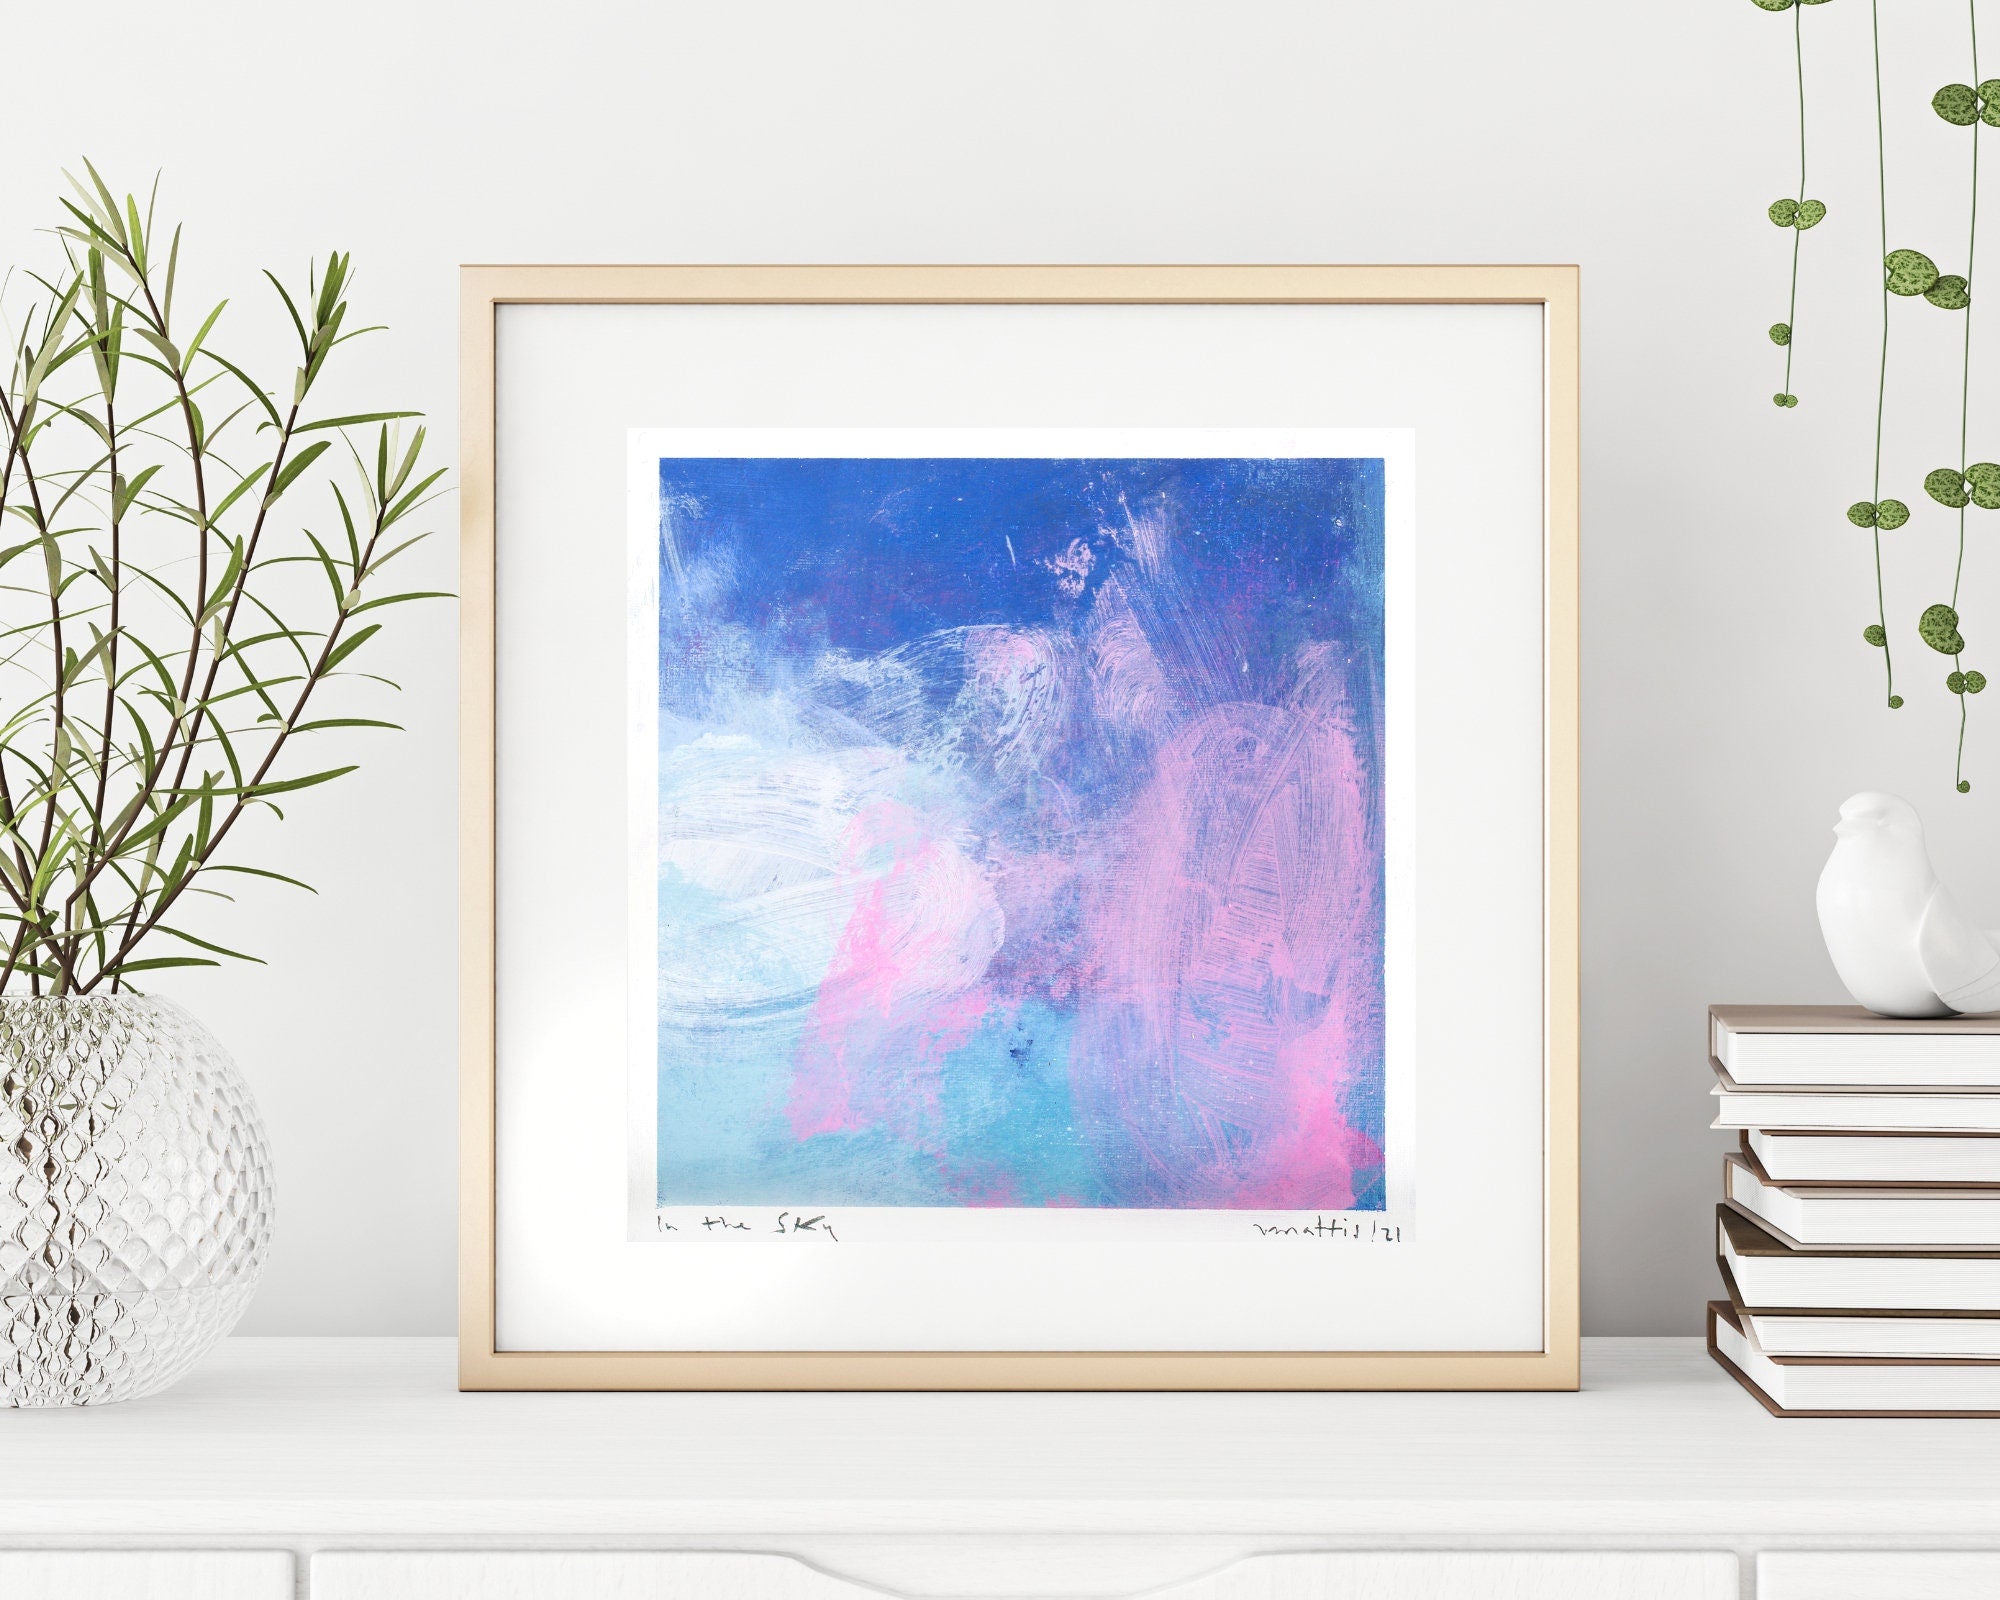 blush pink cloud painting modern wall abstract art, miniature painting 10"x10" by Camilo Mattis